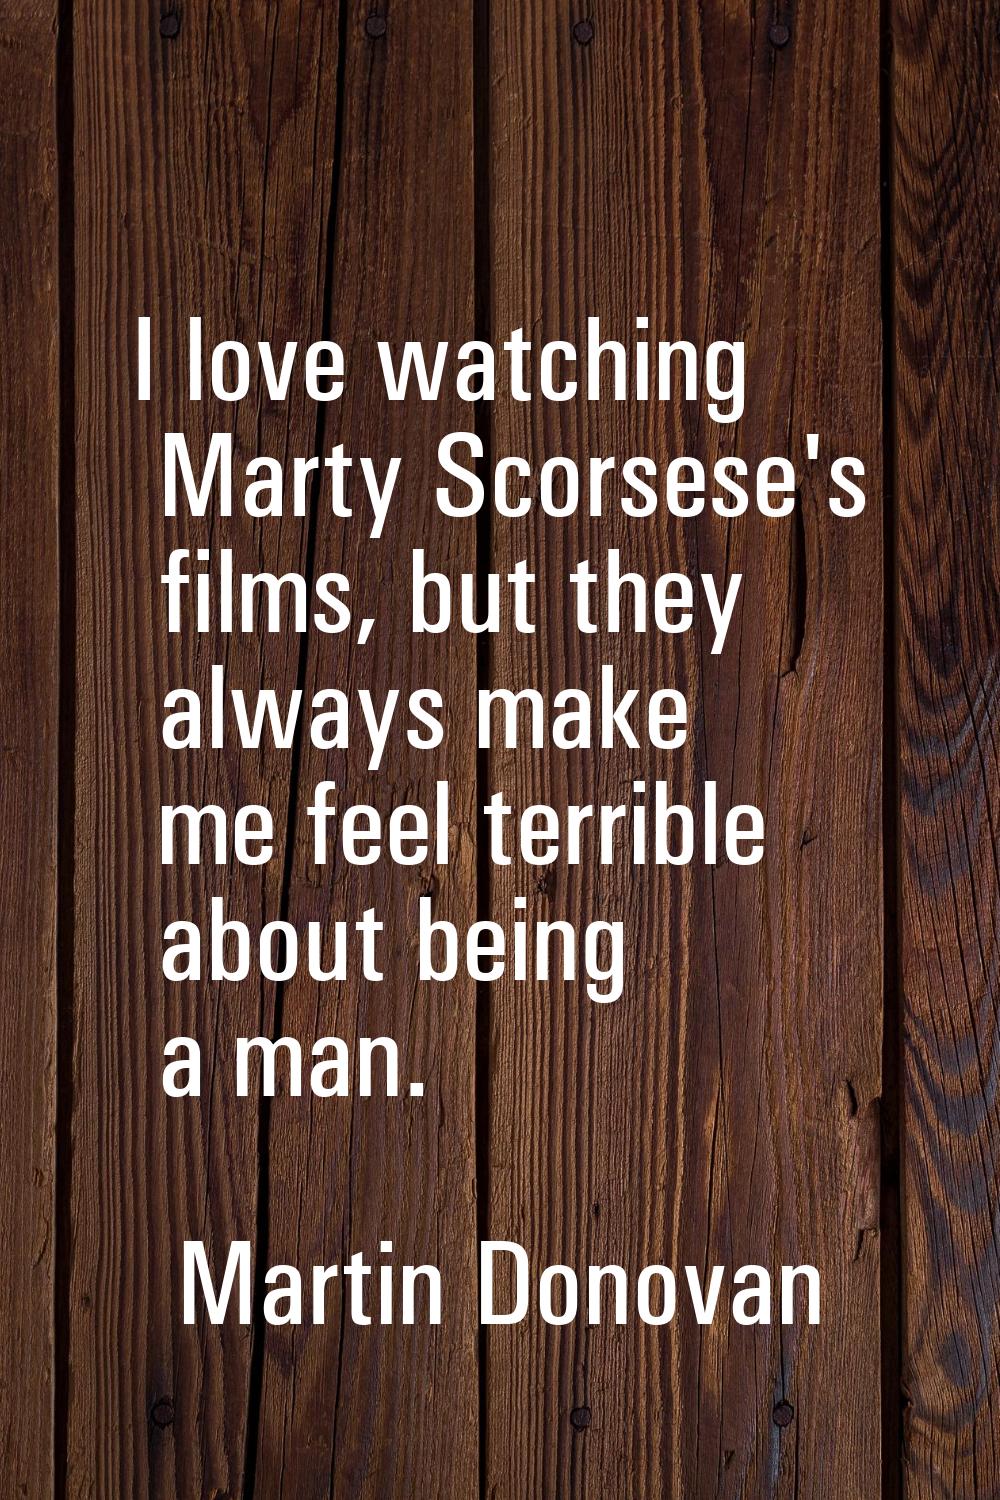 I love watching Marty Scorsese's films, but they always make me feel terrible about being a man.